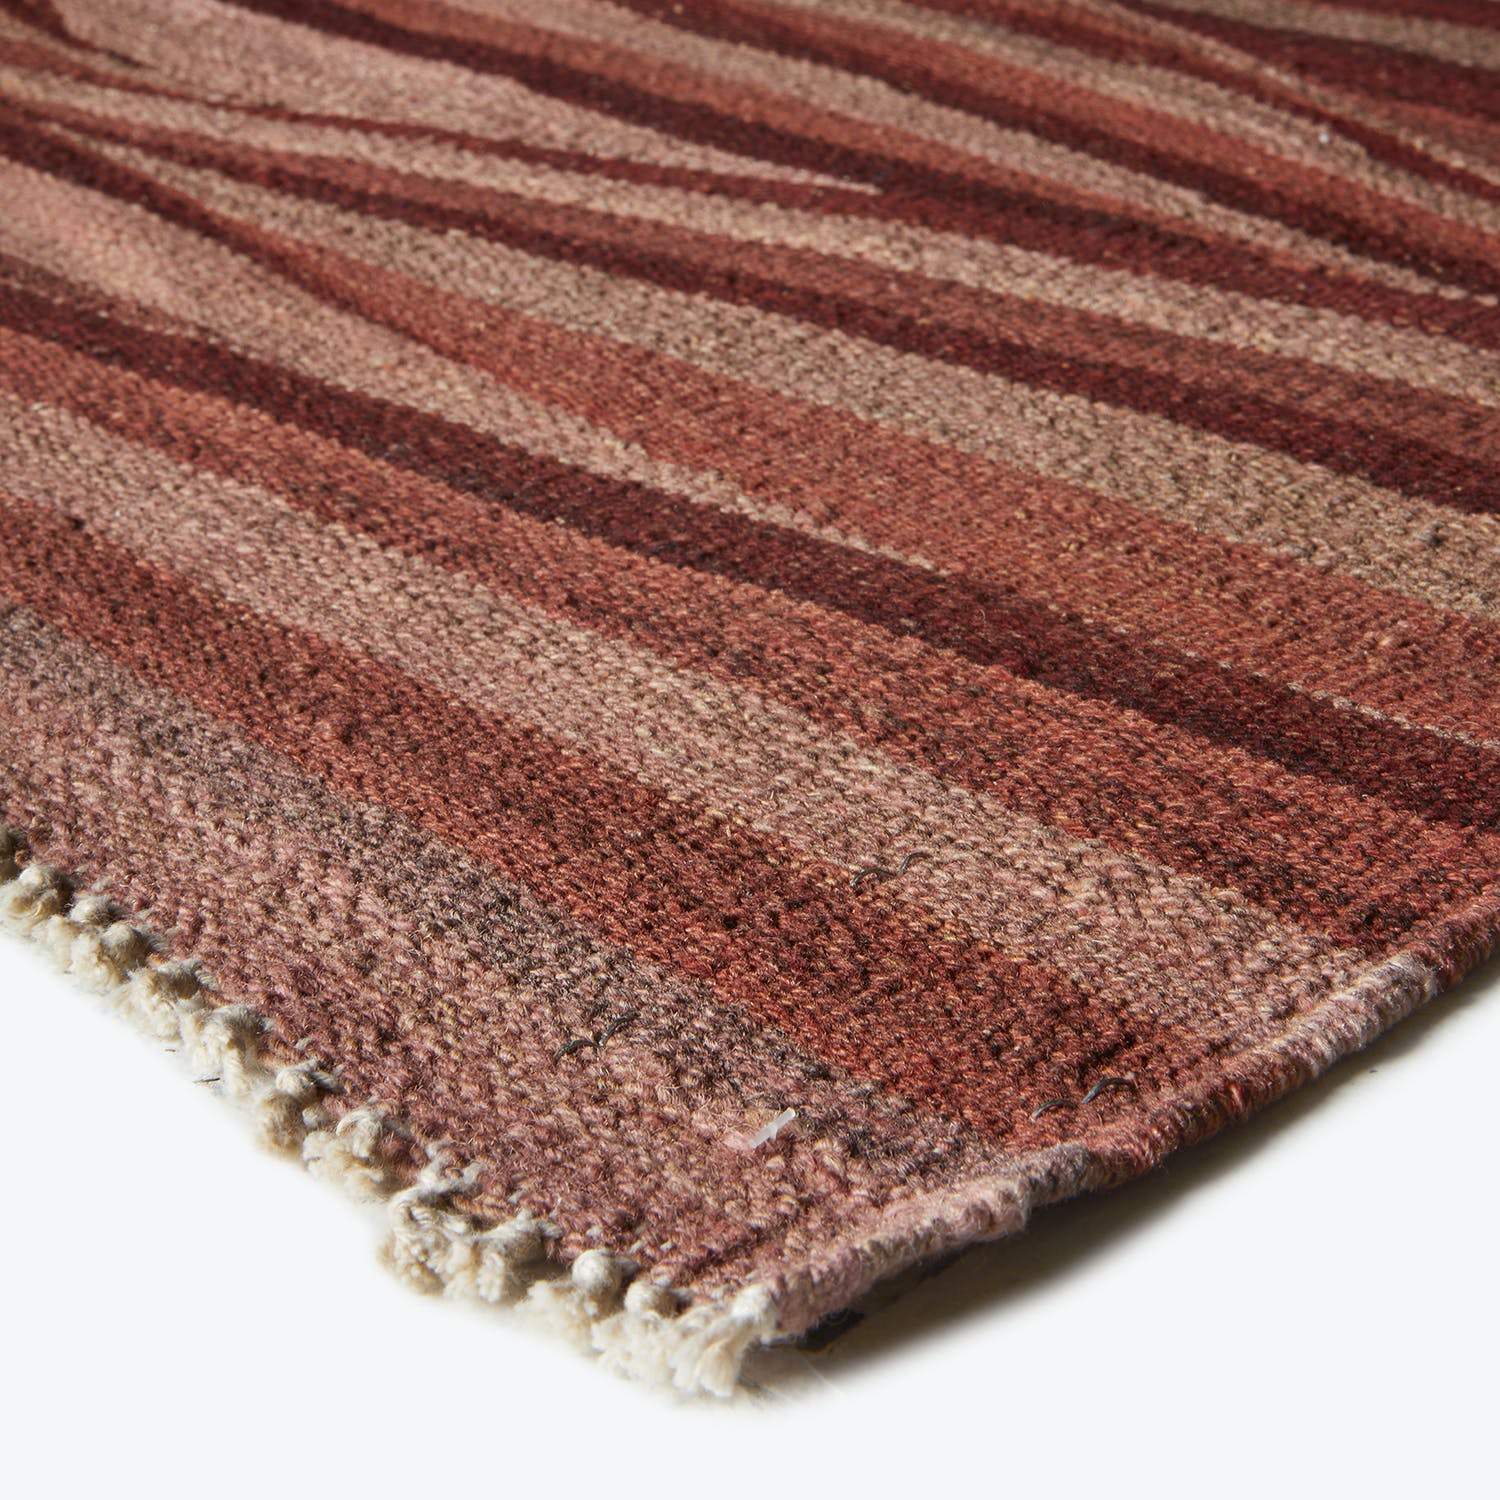 Woolen striped rug with fringed edge showcasing varied brown hues.